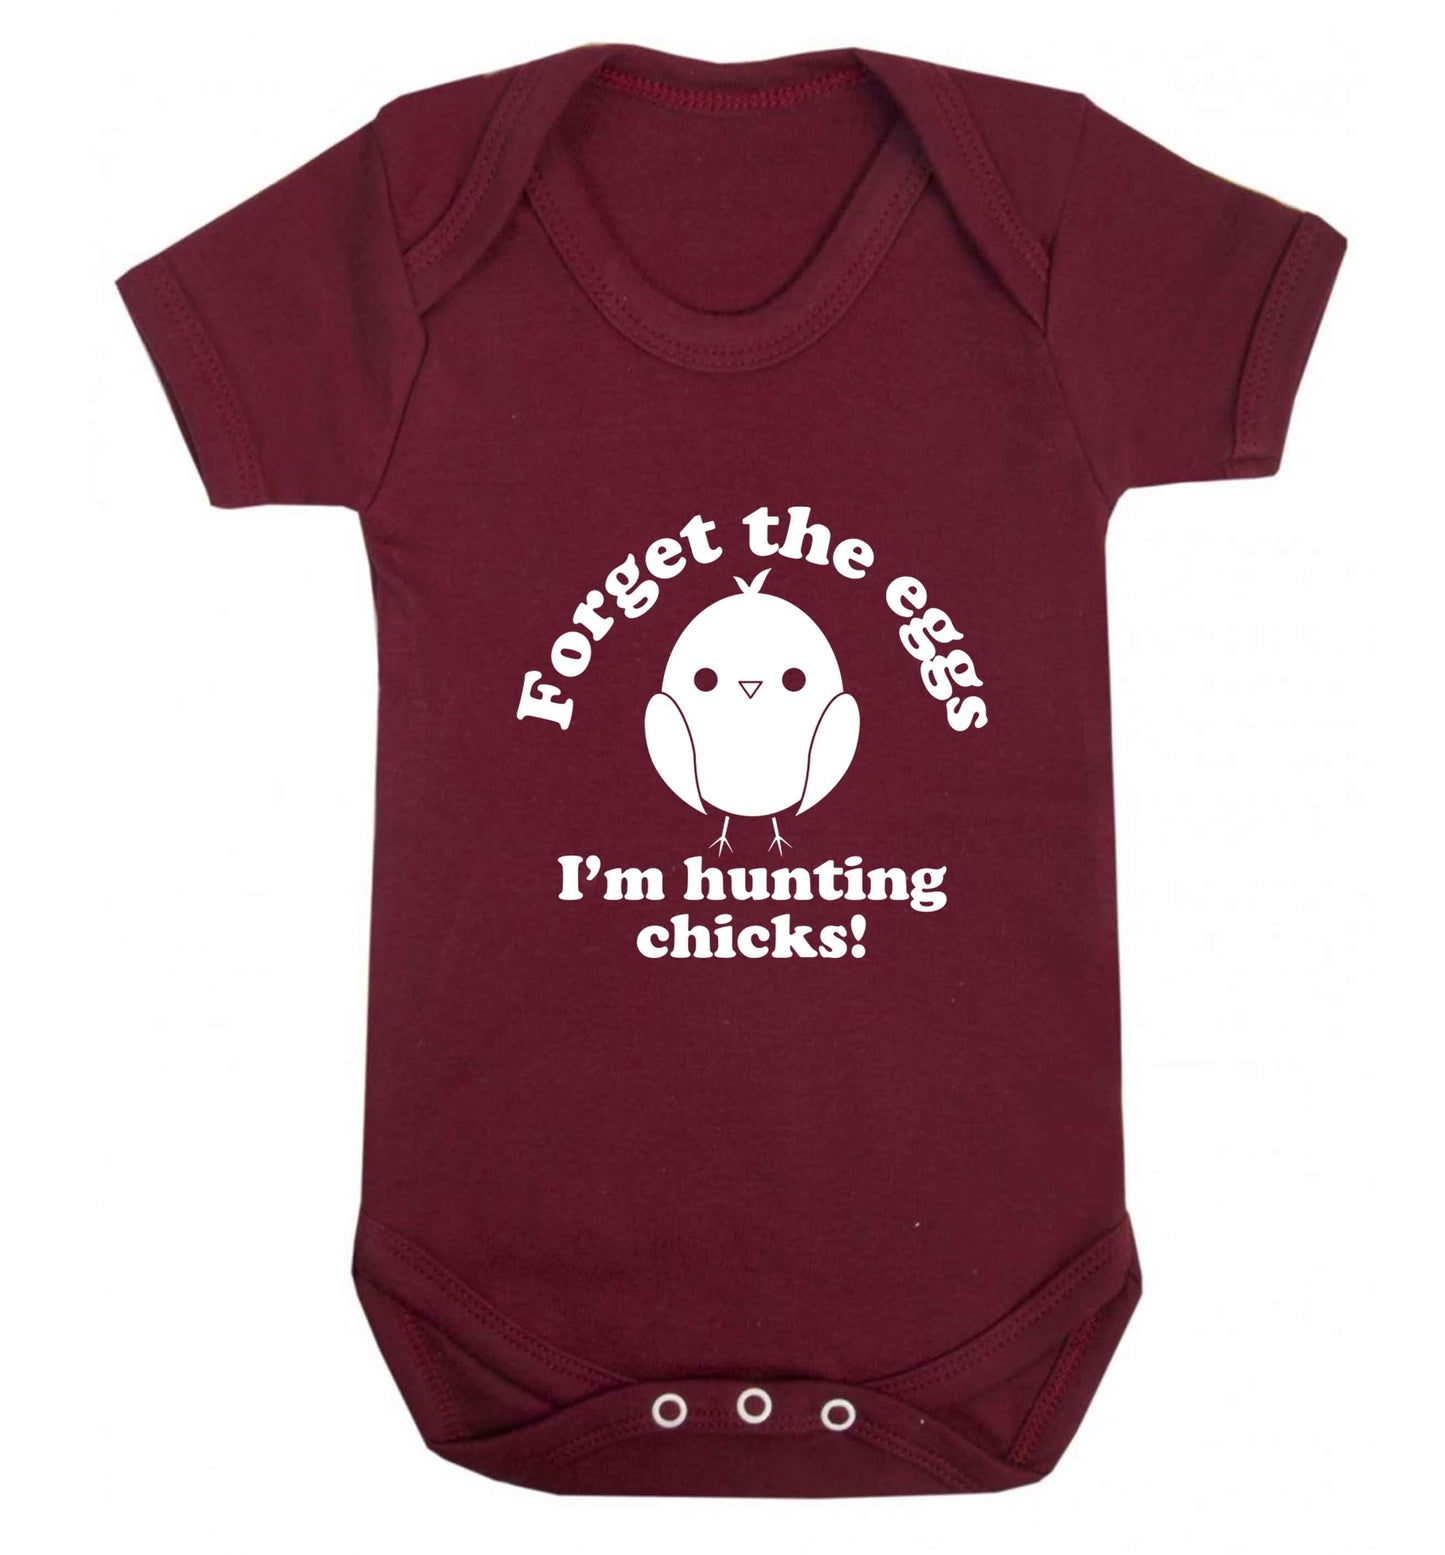 Forget the eggs I'm hunting chicks! baby vest maroon 18-24 months